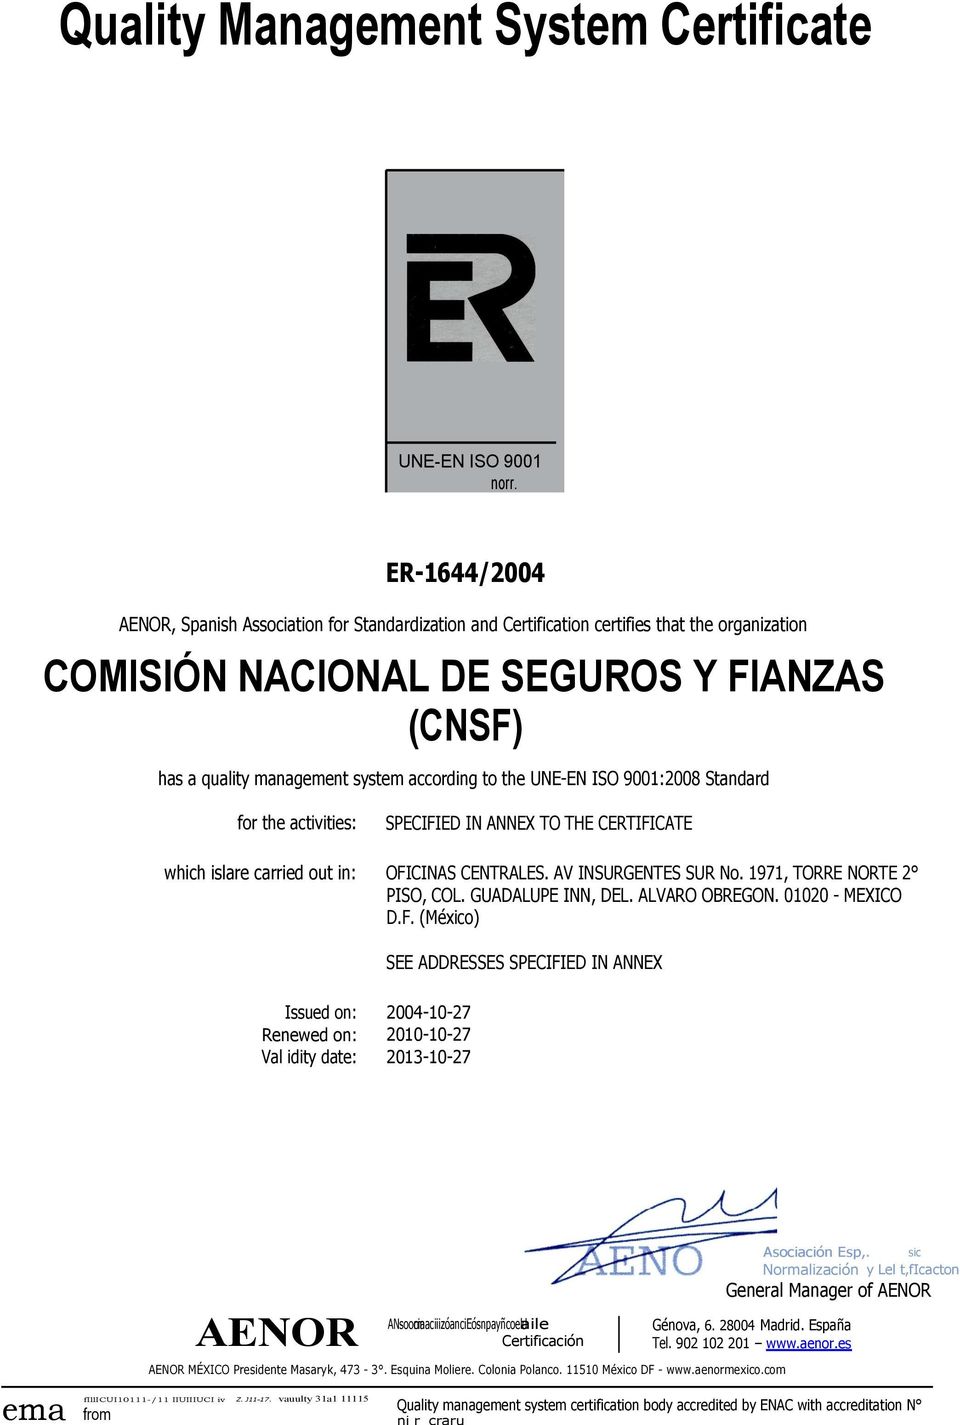 ER-1644/2004, Spanish Association for Standardization and Certification certifies that the organization COMISIÓN NACIONAL DE SEGUROS Y FIANZAS (CNSF) has a quality management system according to the